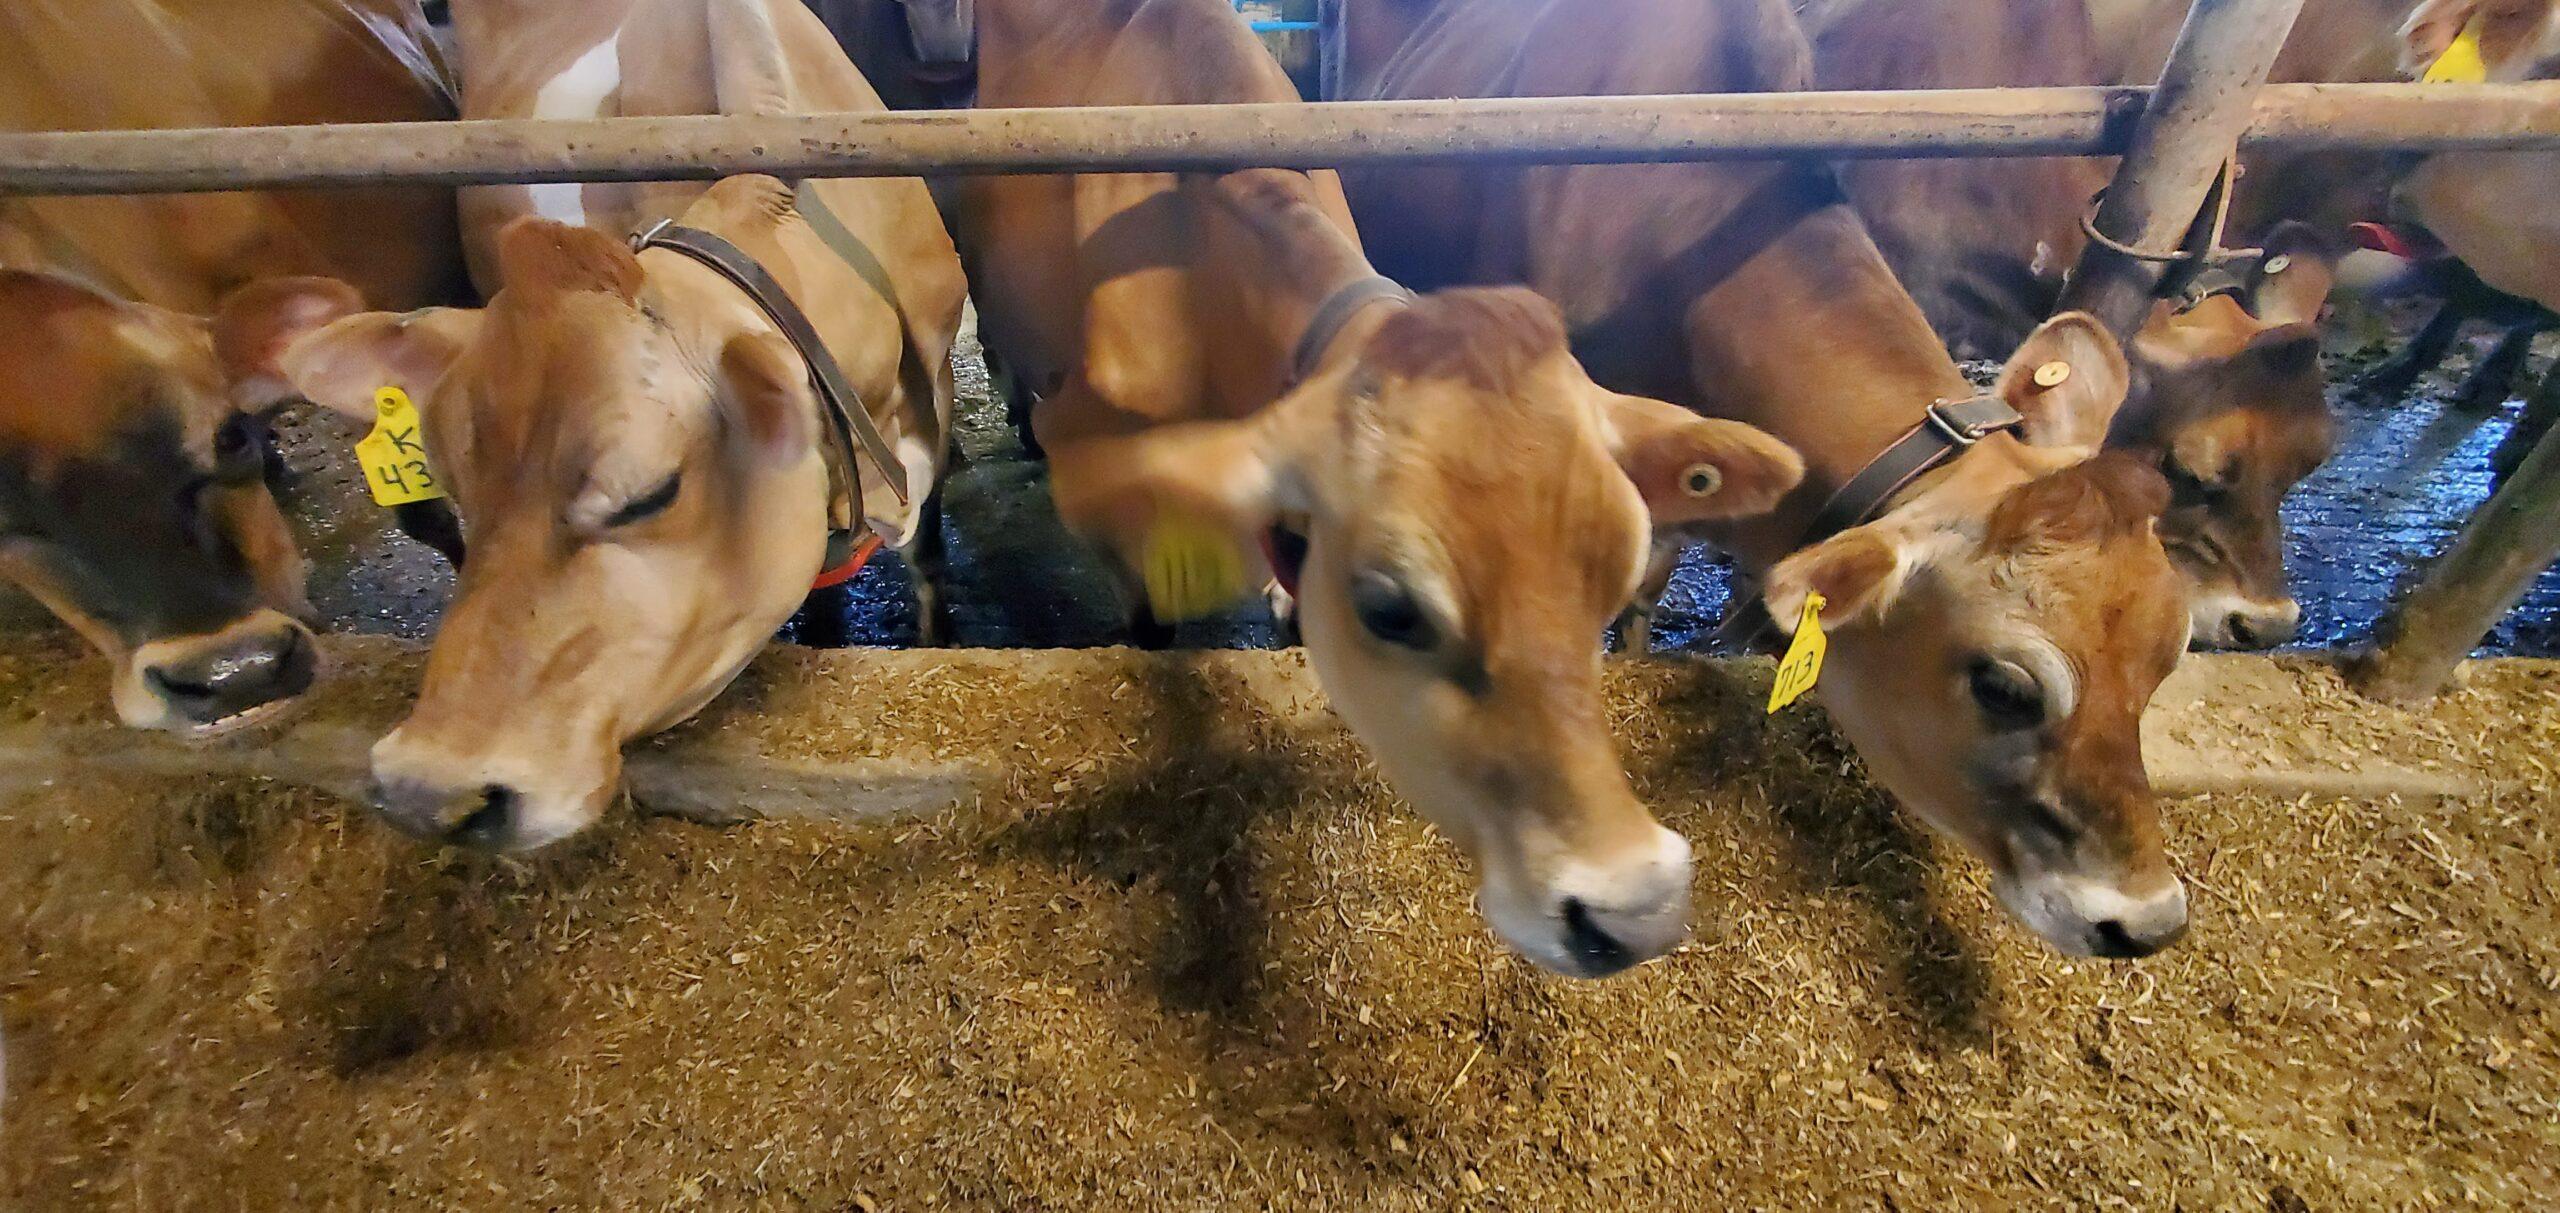 Cows getting ready to eat